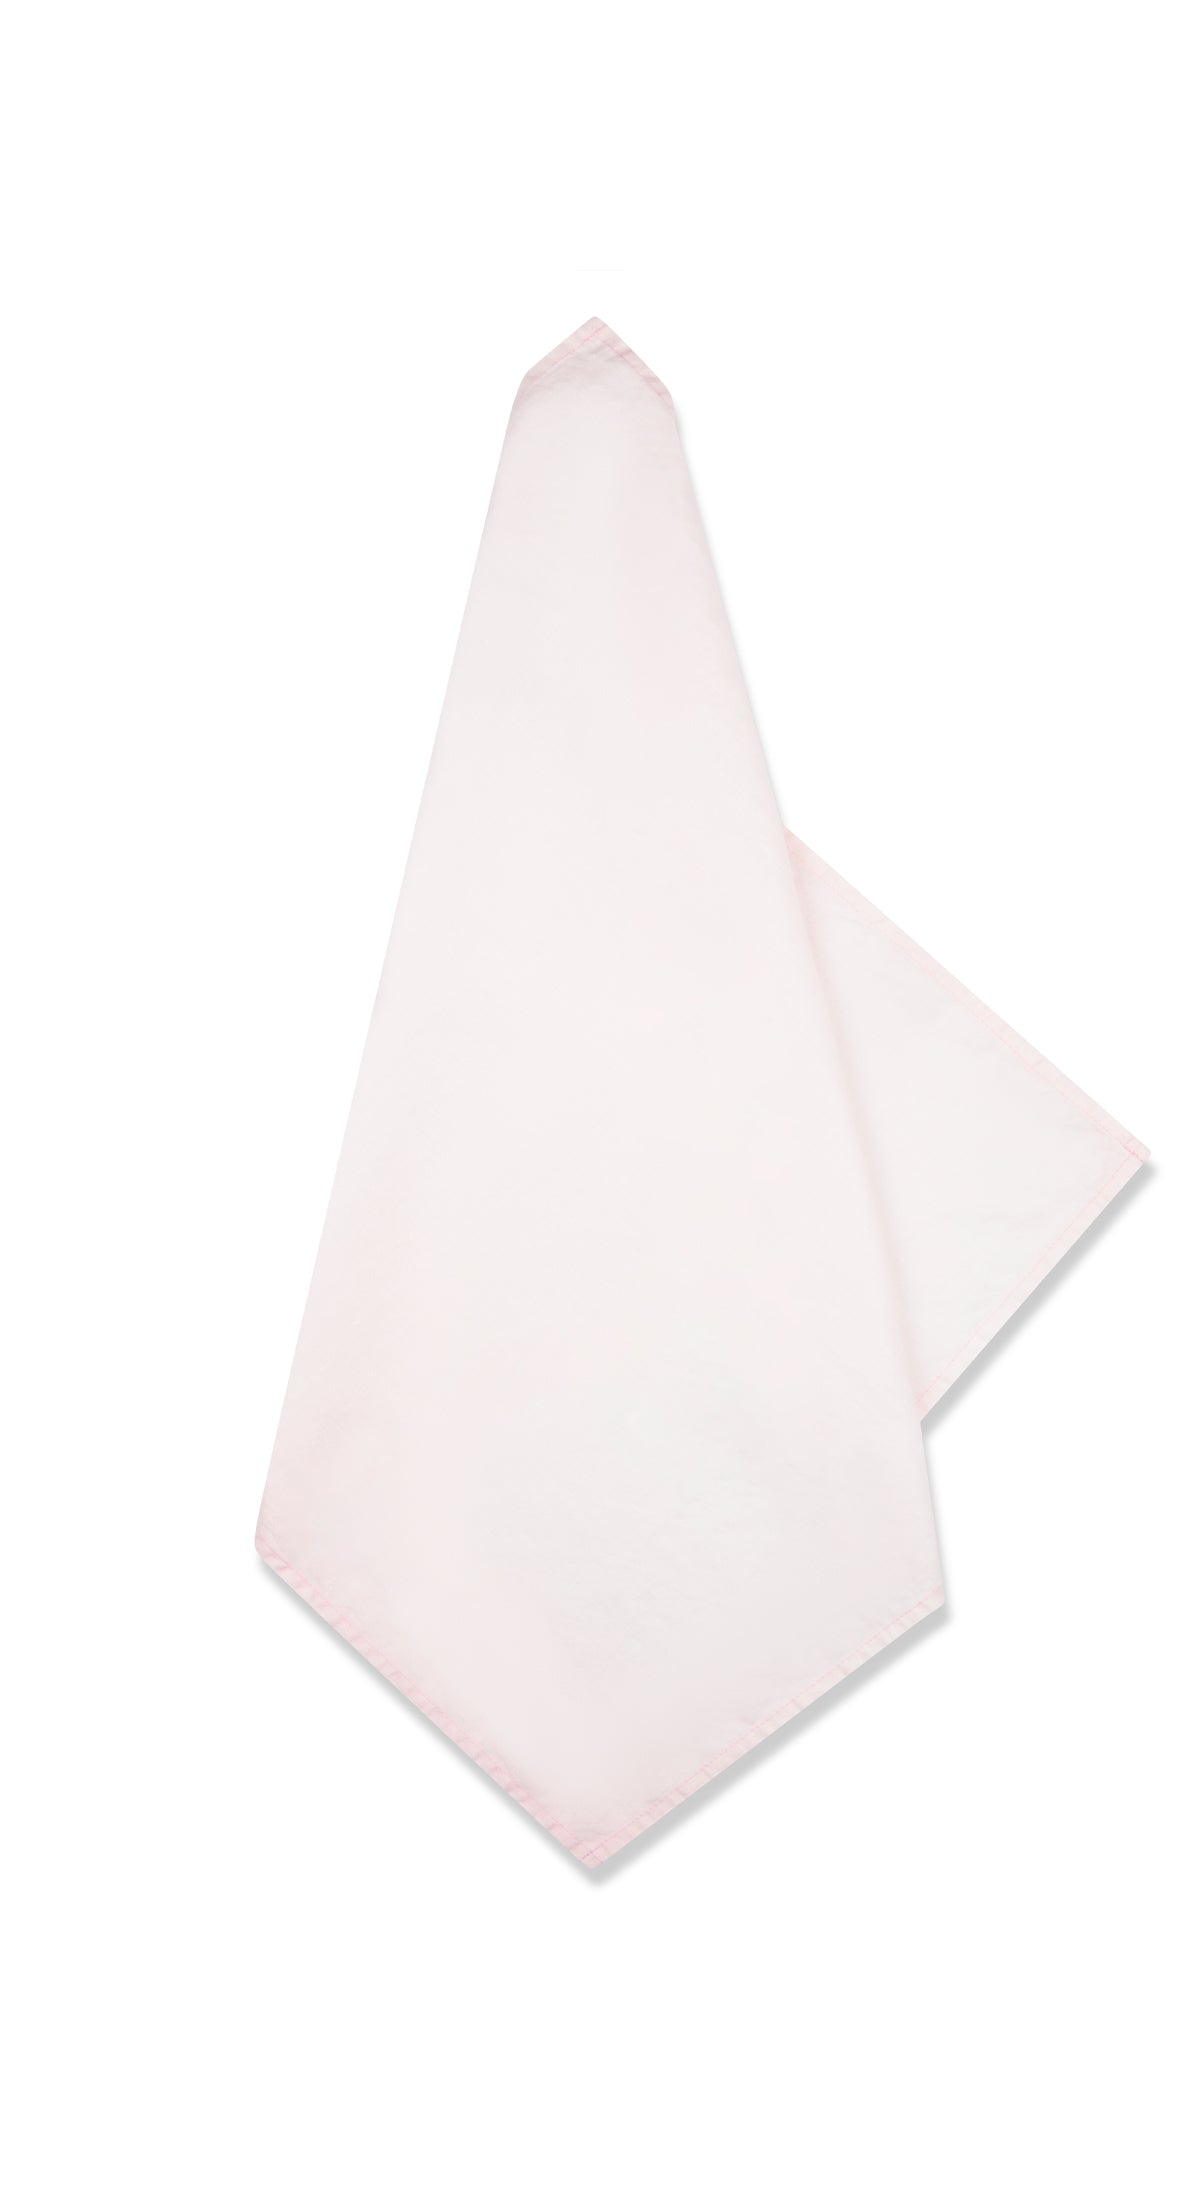 'Barely Pink' Linen Napkin in Pink, 50x50cm